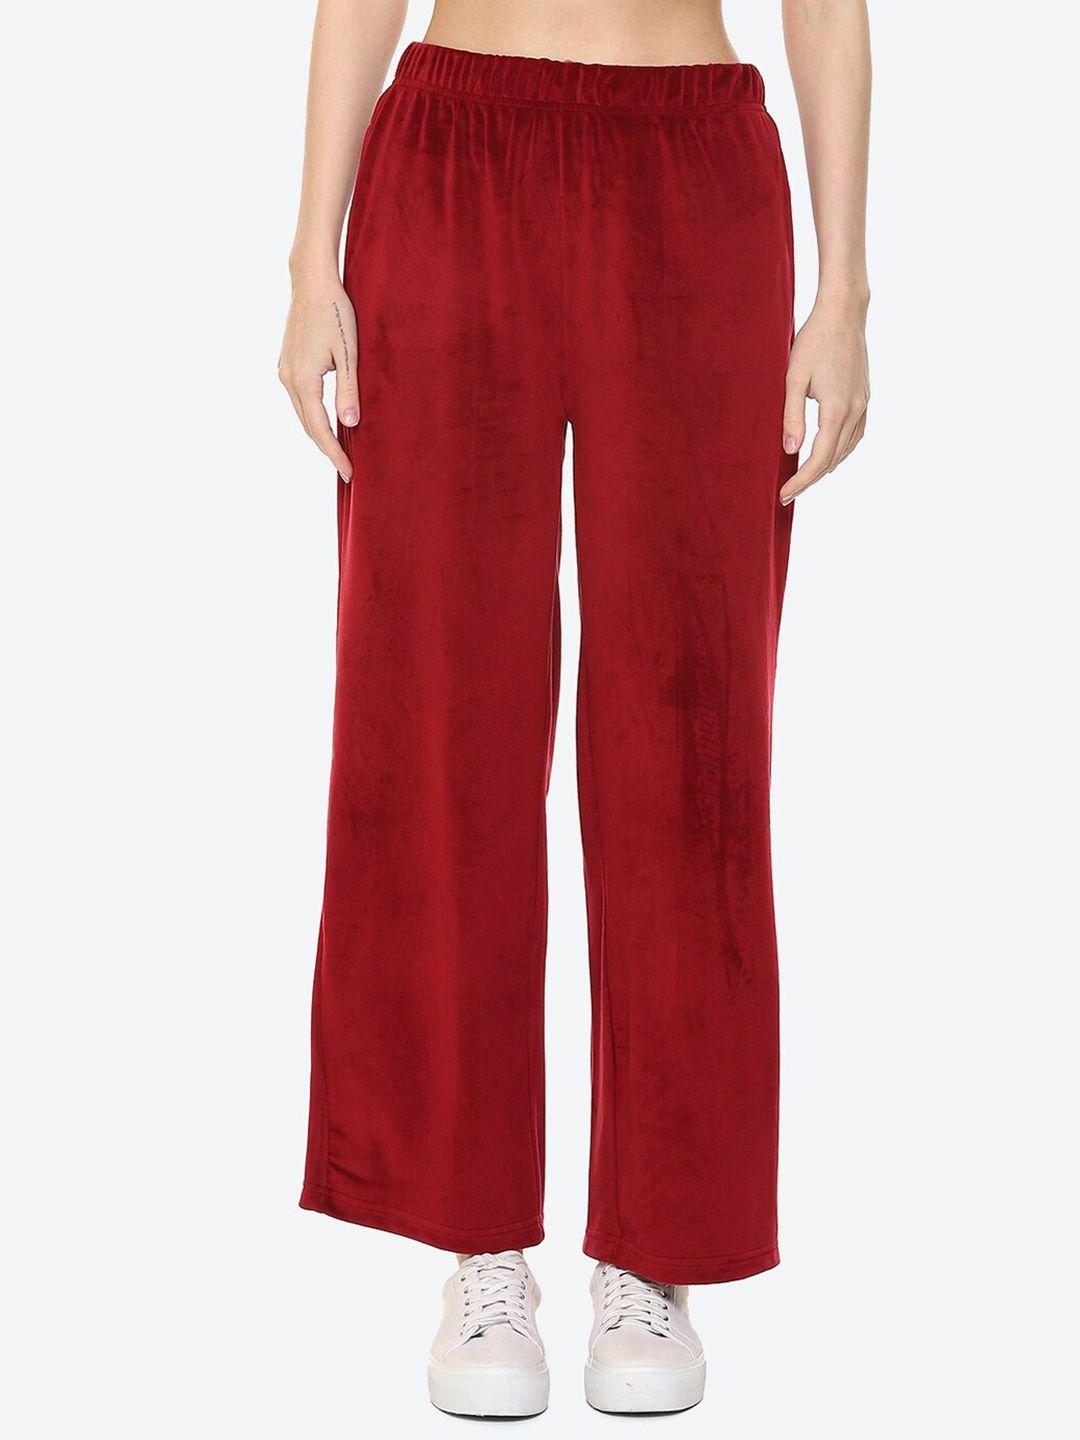 2bme-women-mid-rise-straight-fit-track-pants